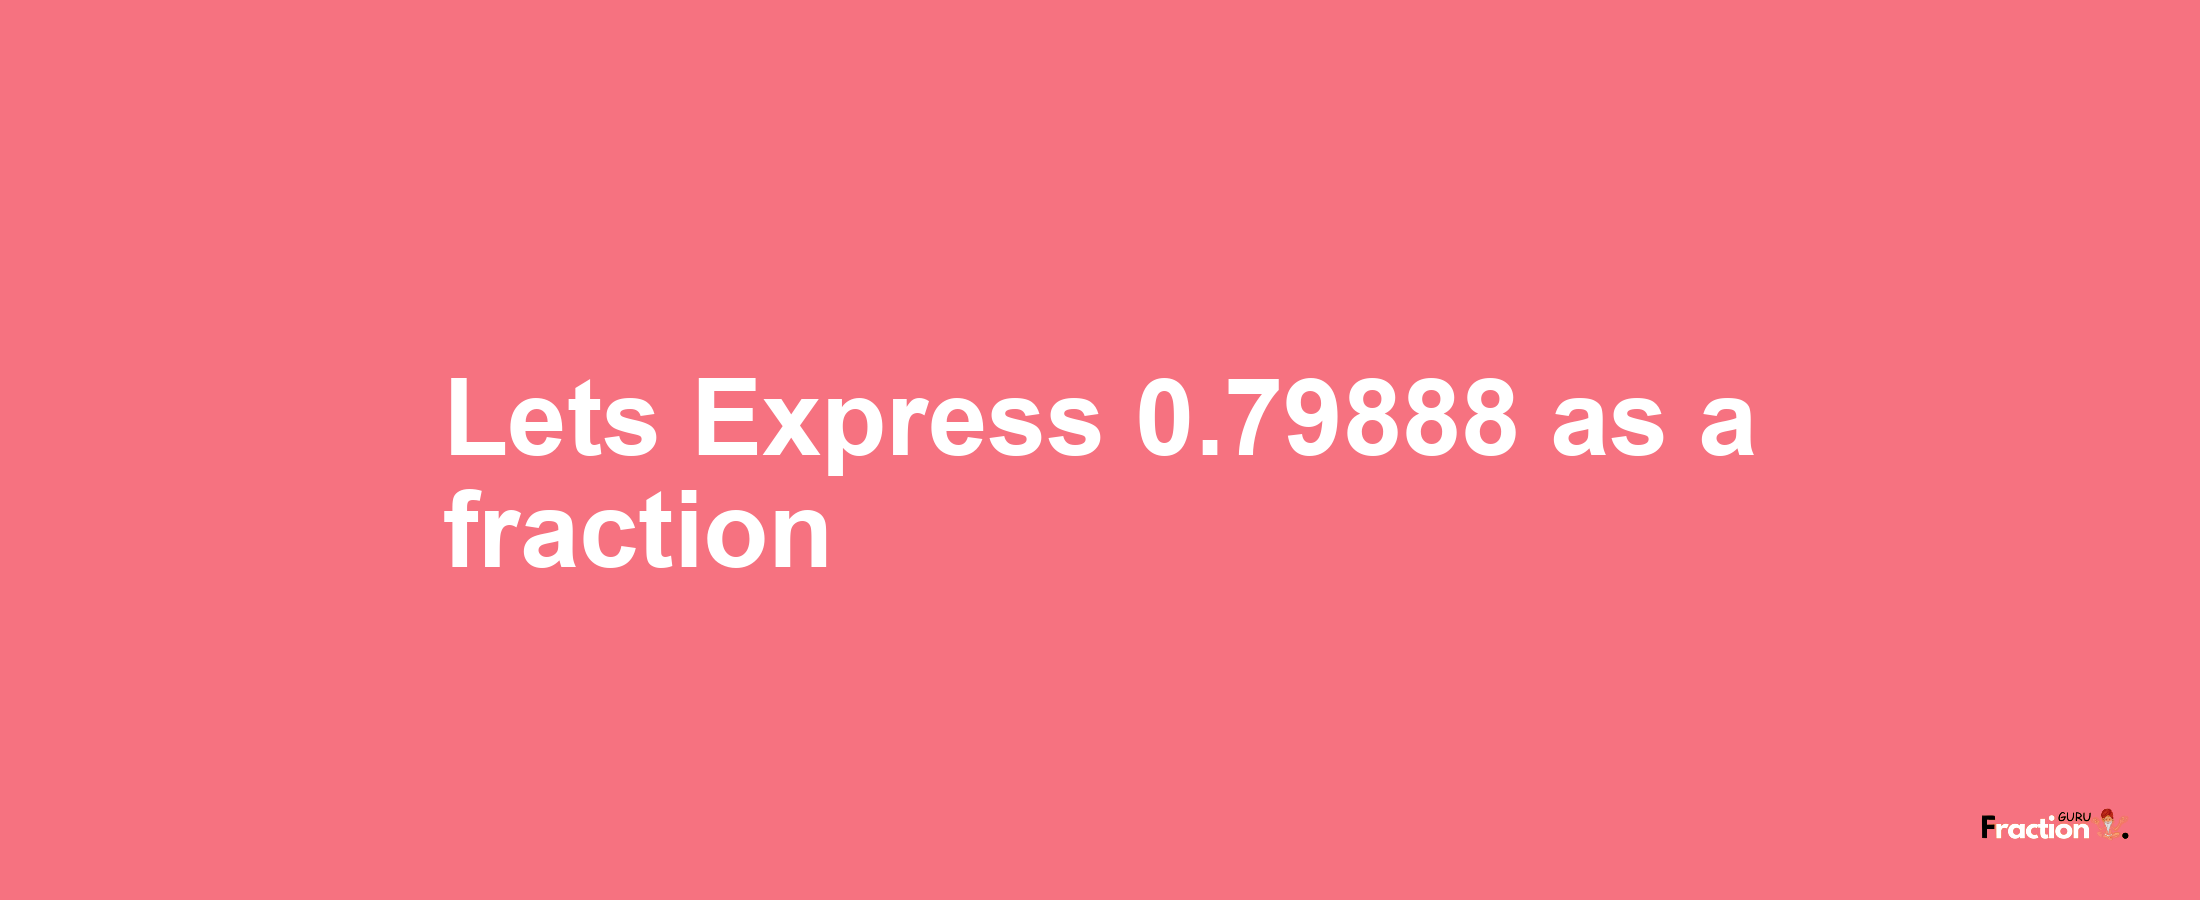 Lets Express 0.79888 as afraction